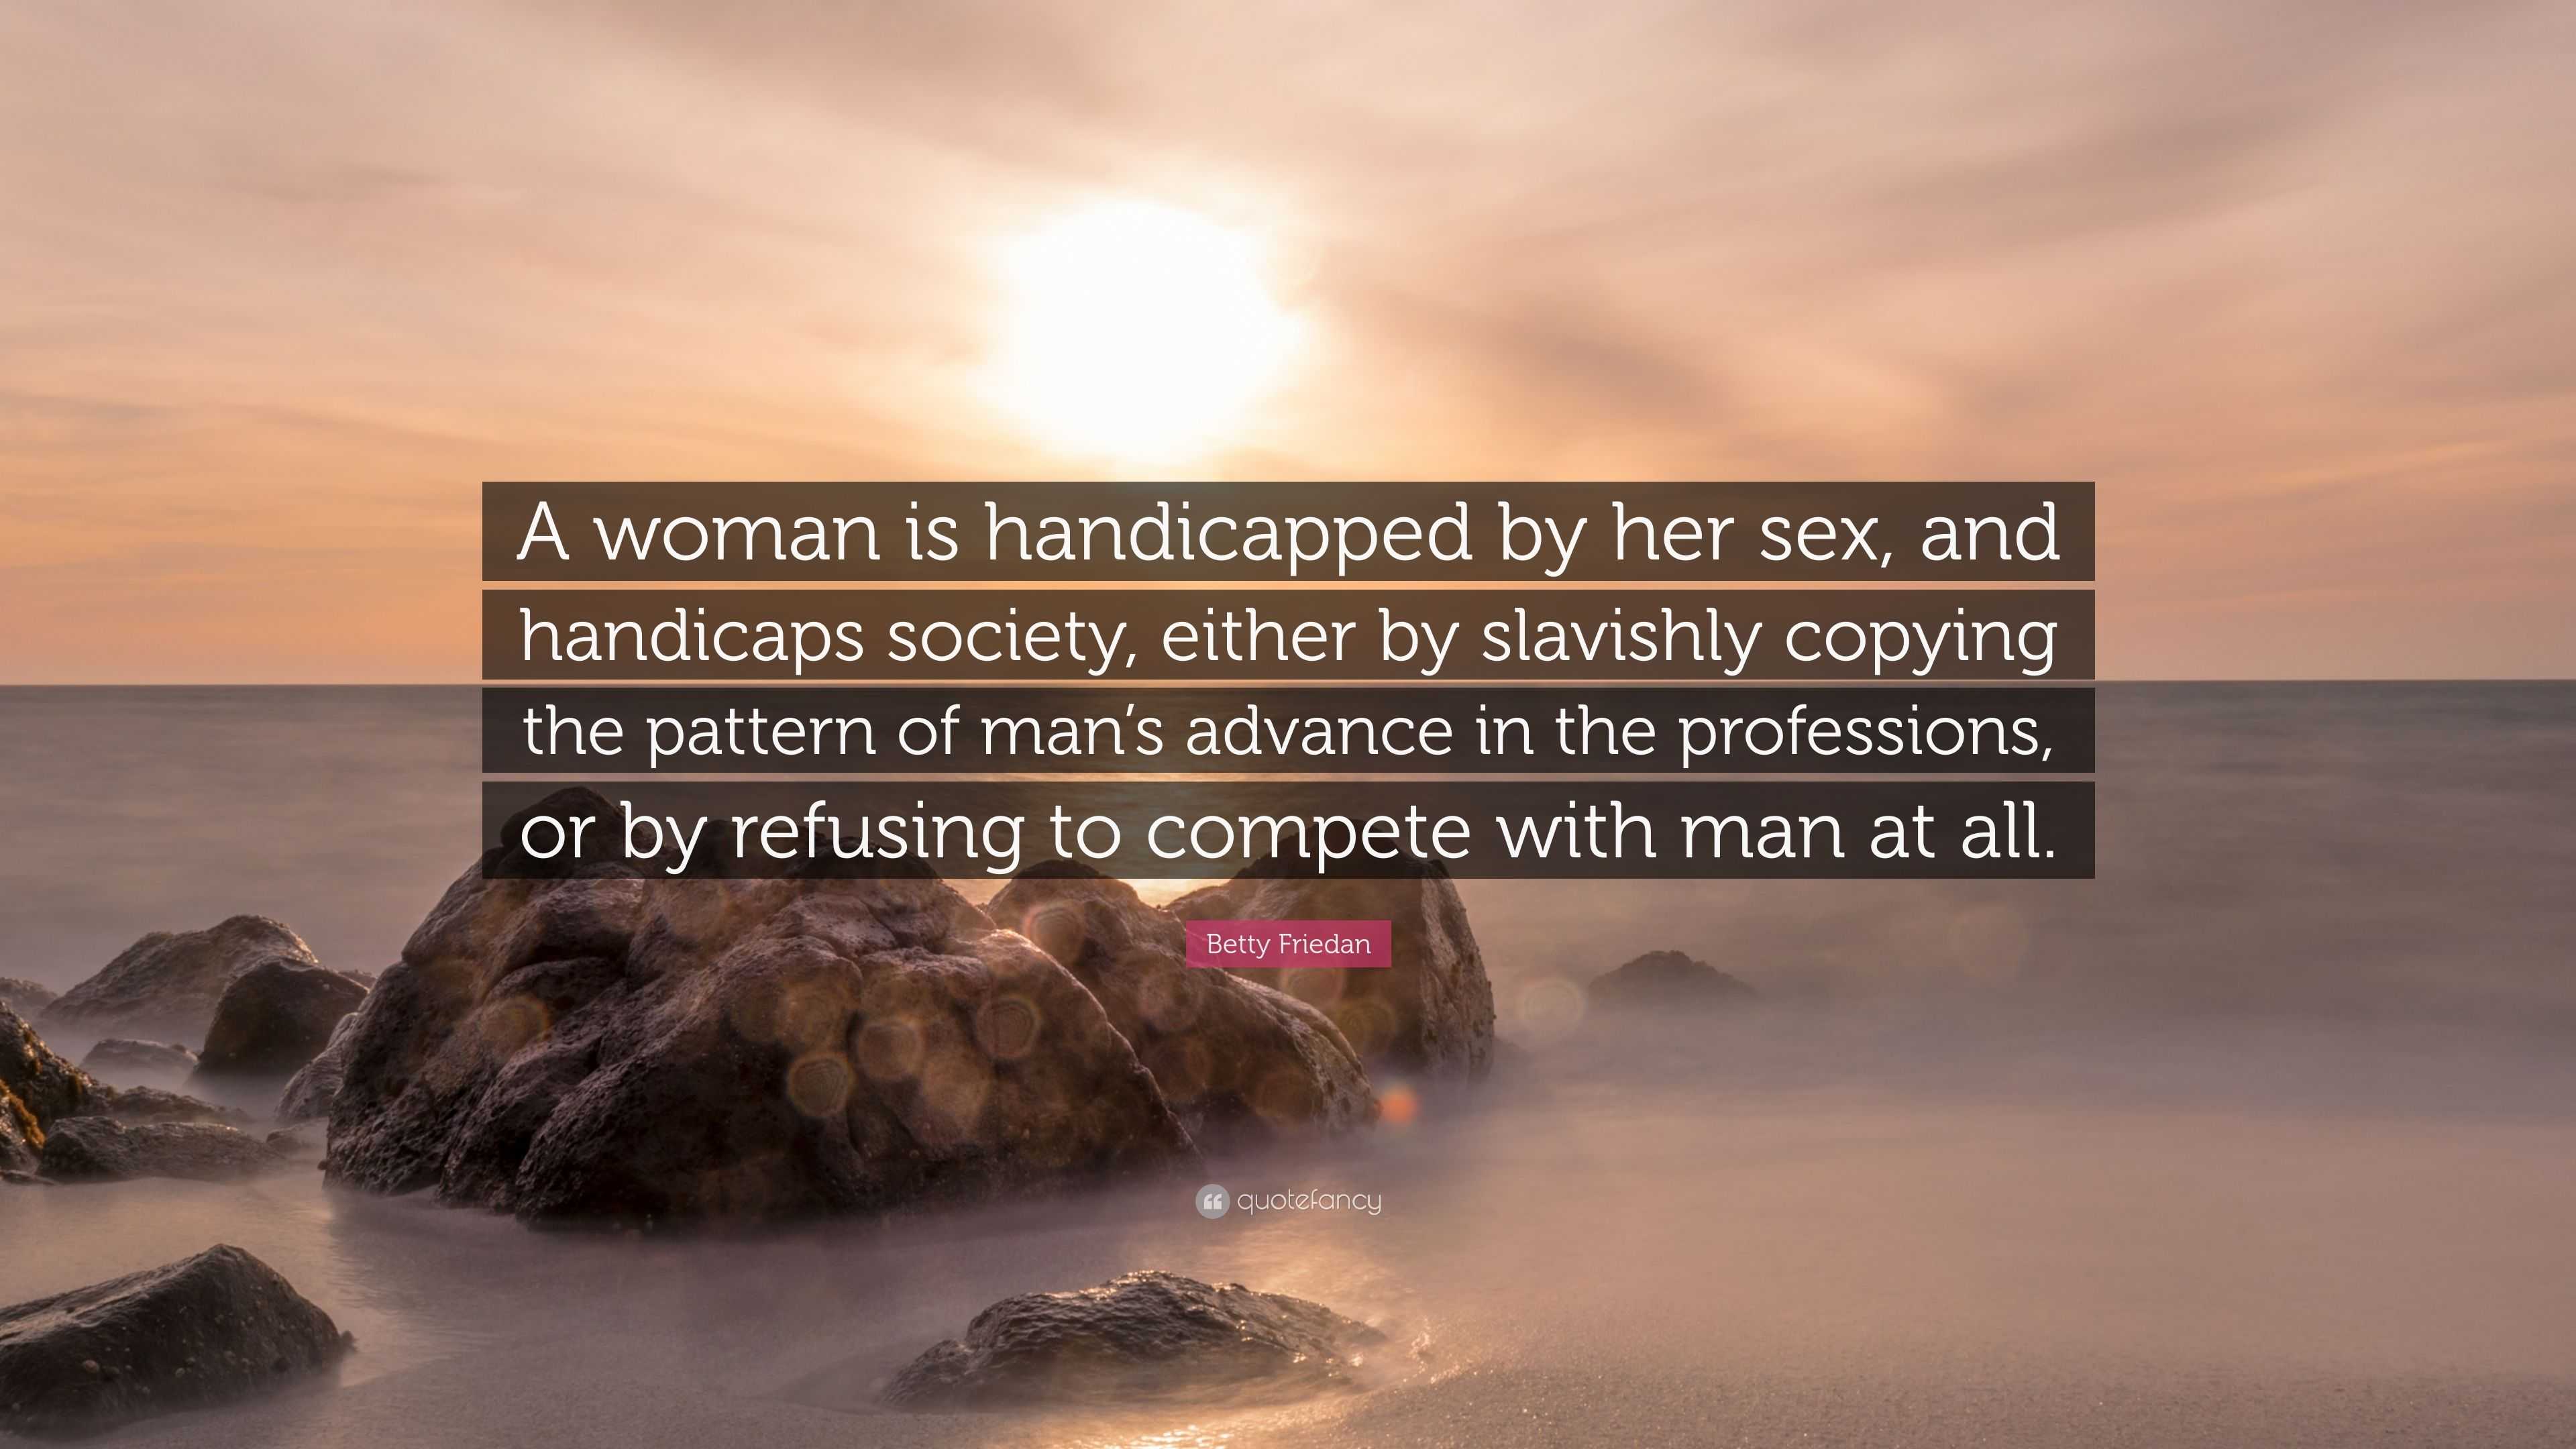 Betty Friedan Quote “A woman is handicapped by her sex, and handicaps society, either by slavishly copying the pattern of mans advance in th...”